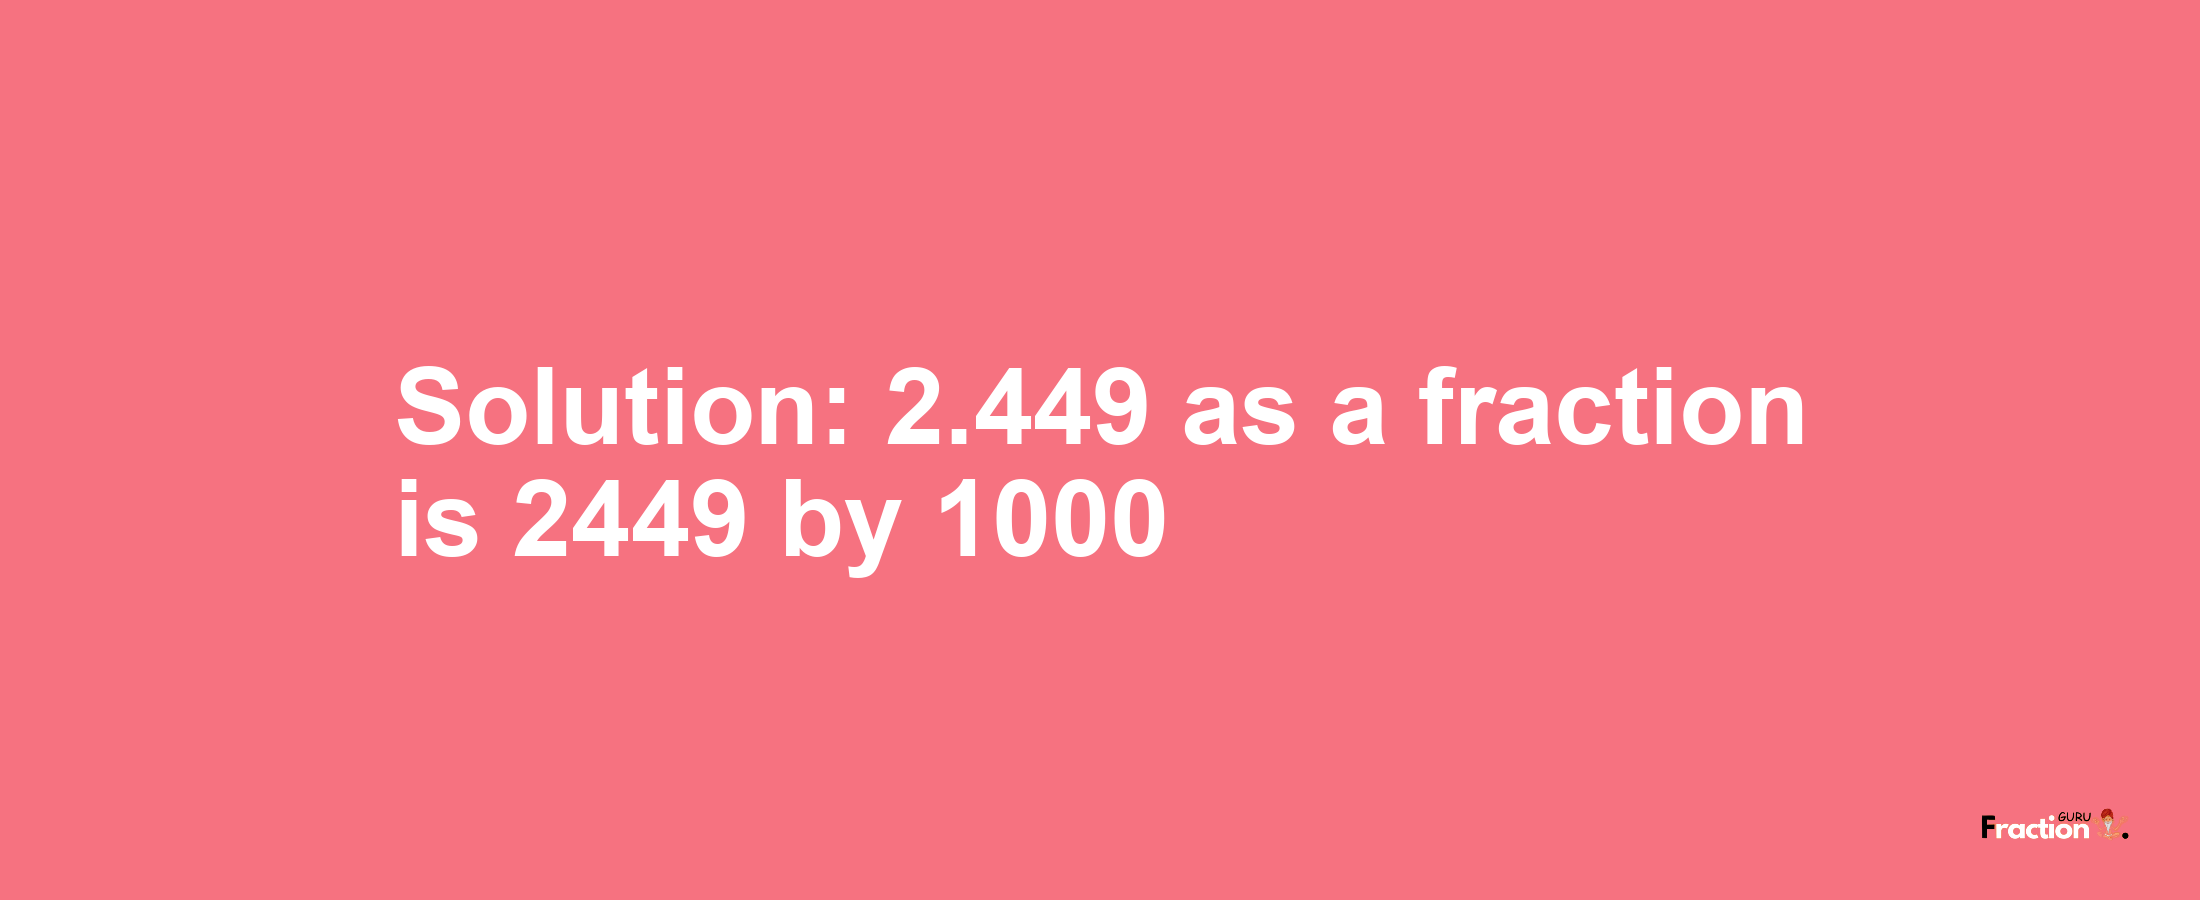 Solution:2.449 as a fraction is 2449/1000